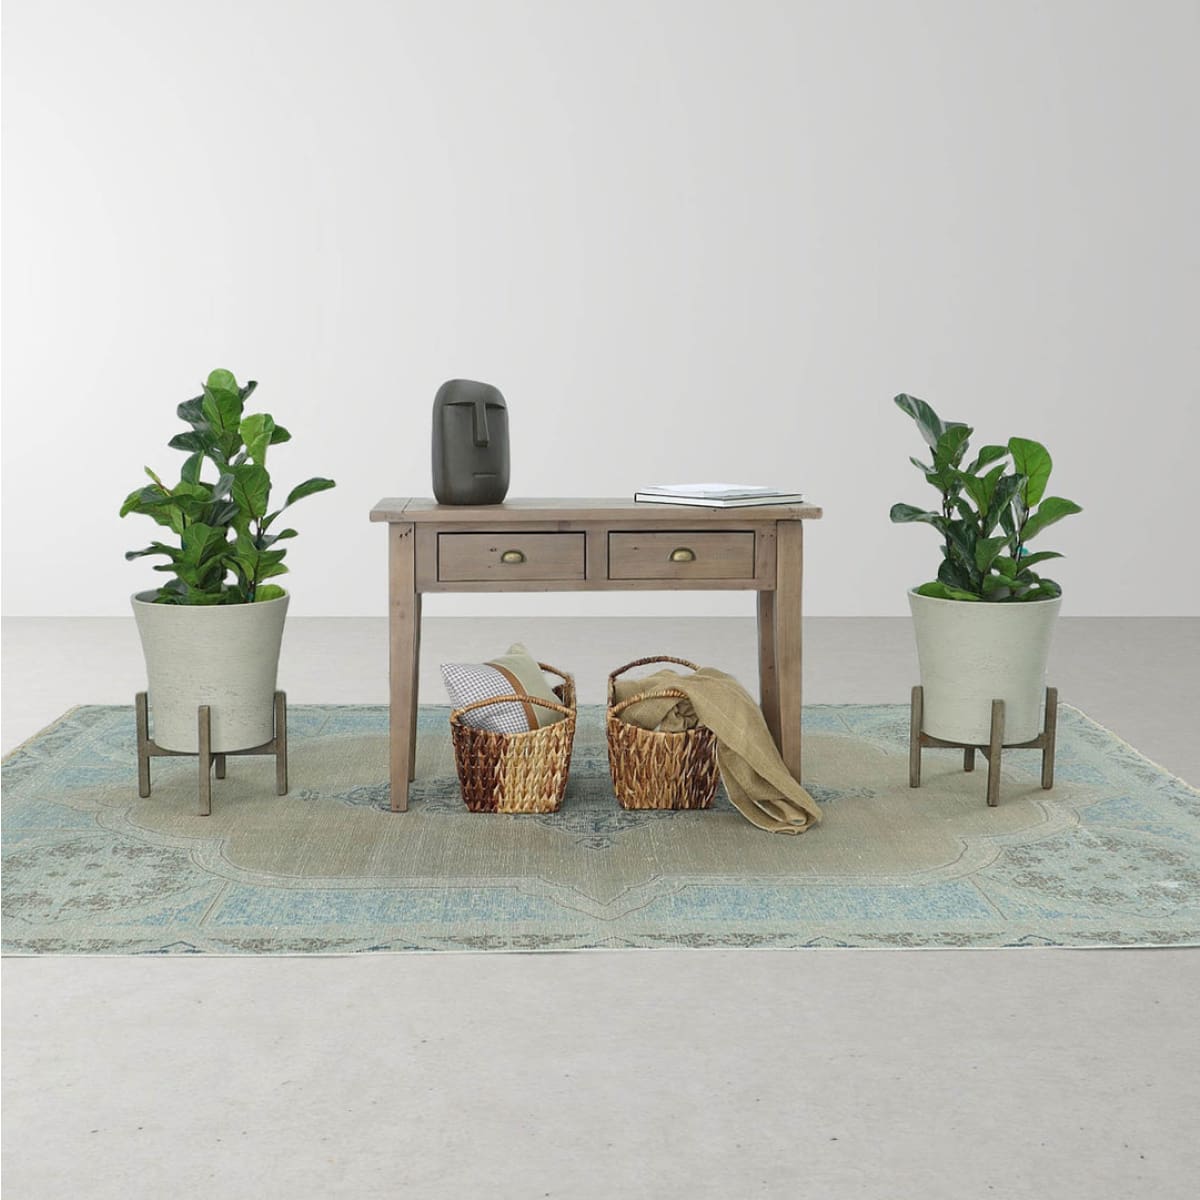 Irish Coast Small Console Table - Sundried - lh-import-console-tables